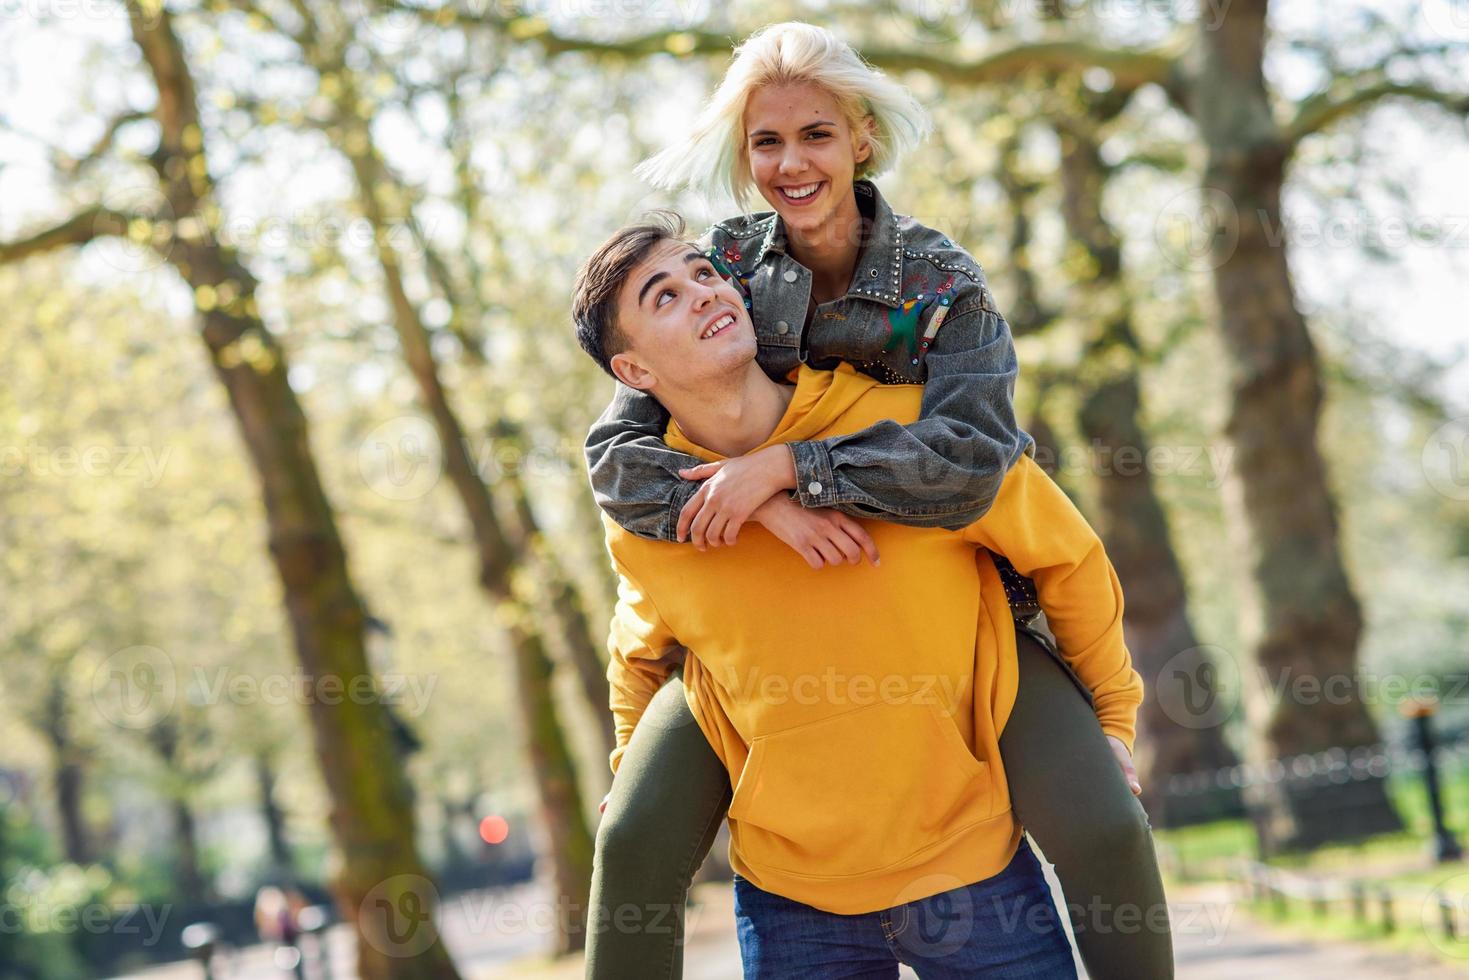 Funny couple in a urban park. Boyfriend carrying his girlfriend on piggyback. photo